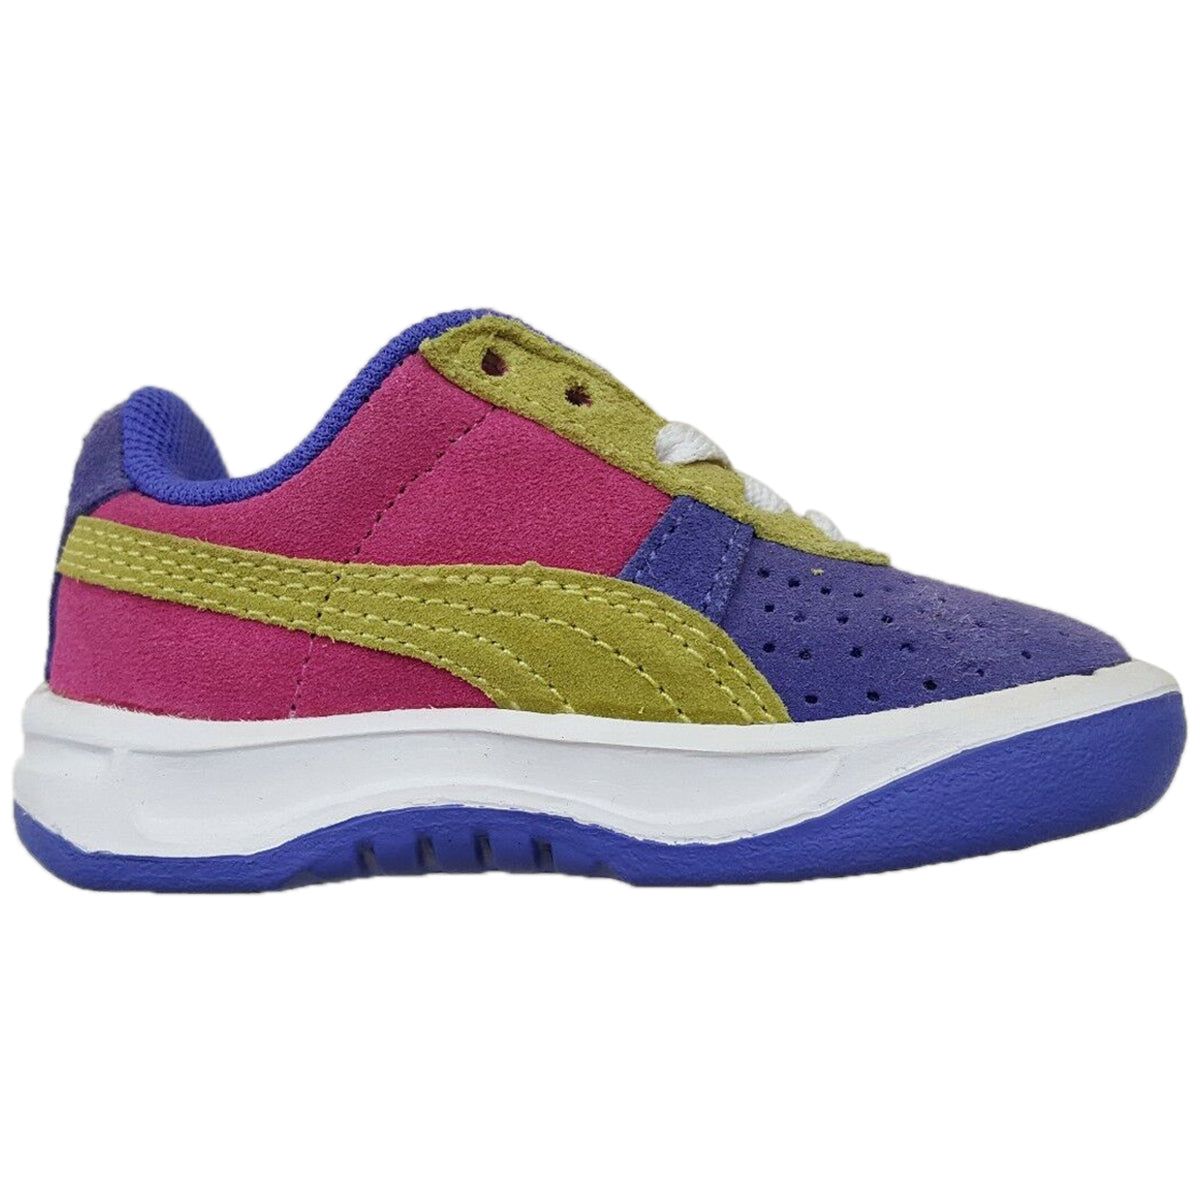 Puma Gv Special Toddlers Style : 358333-02